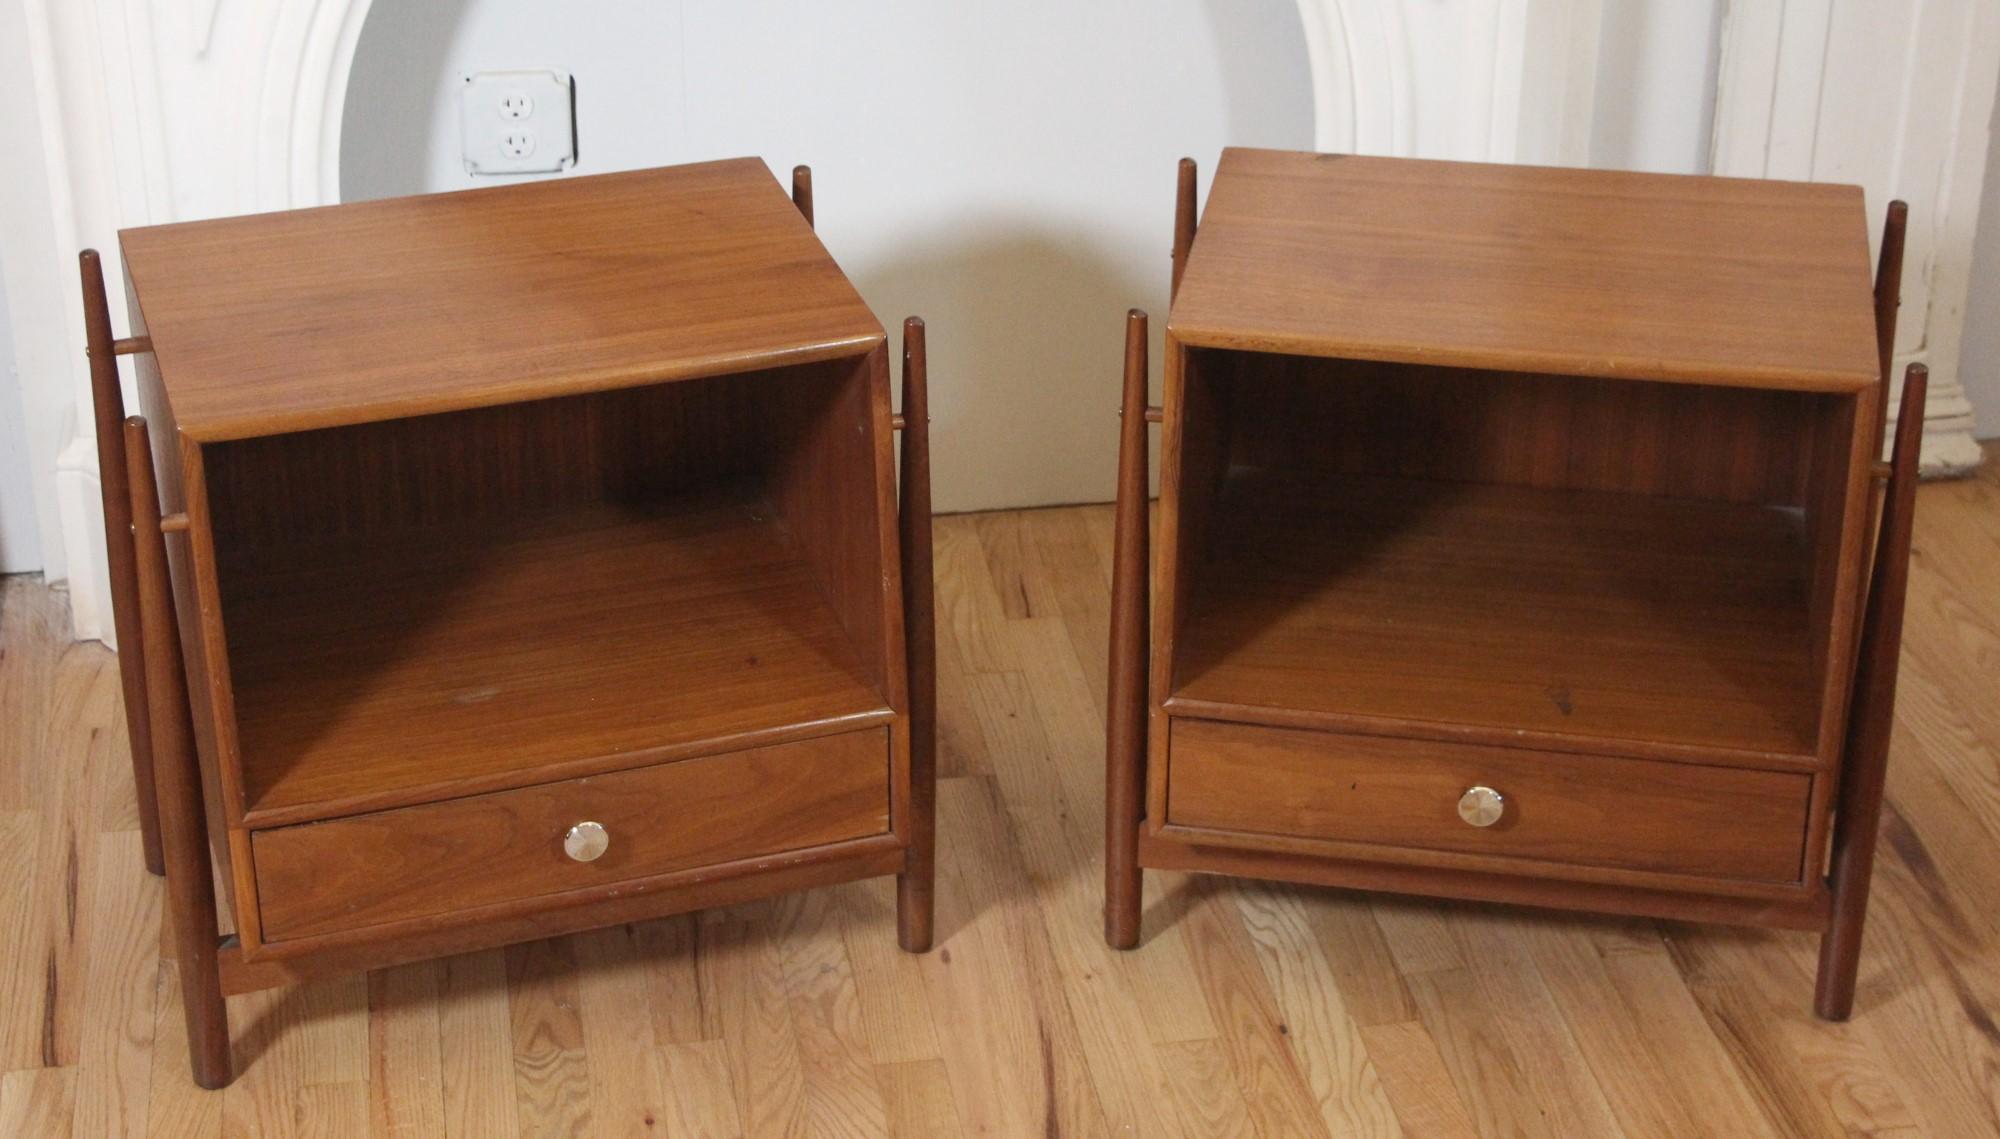 1960 pair of Mid-Century Modern night stands by Drexel. Part of the Declaration line designed by Kipp Stewart. Each stand has one drawer and a big cubby for storage.